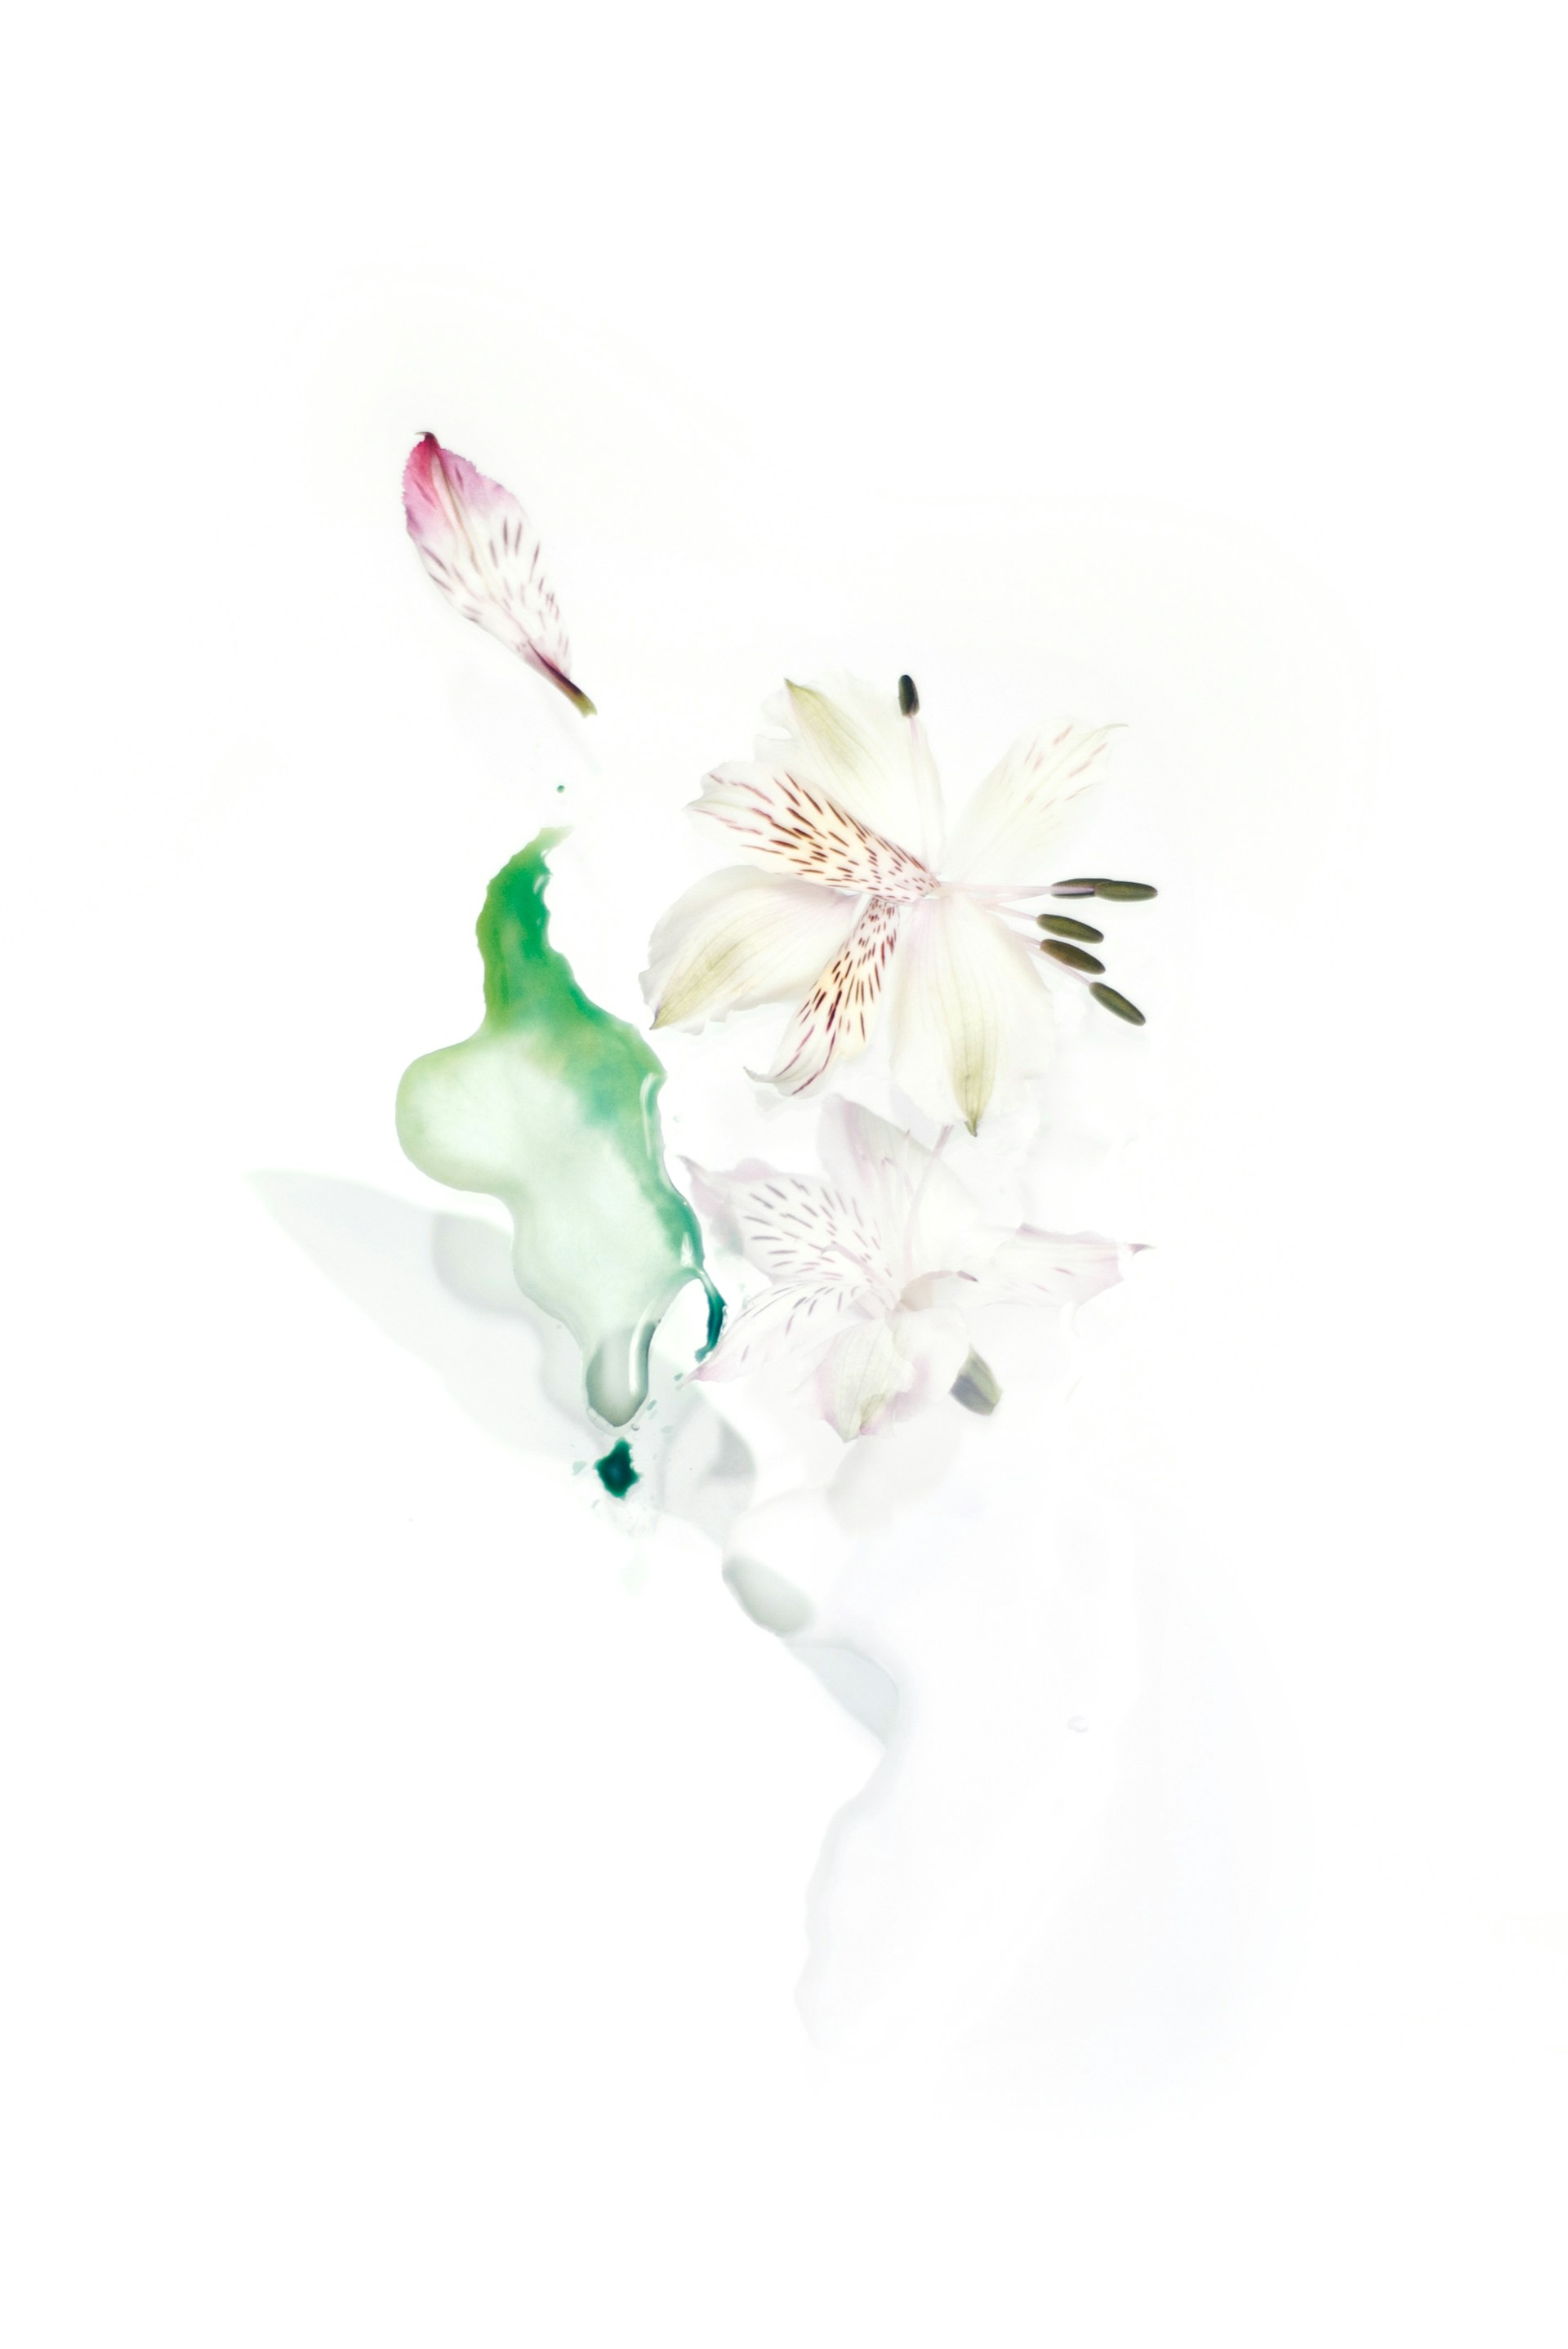 Abstract Floral White Background 1920x2876